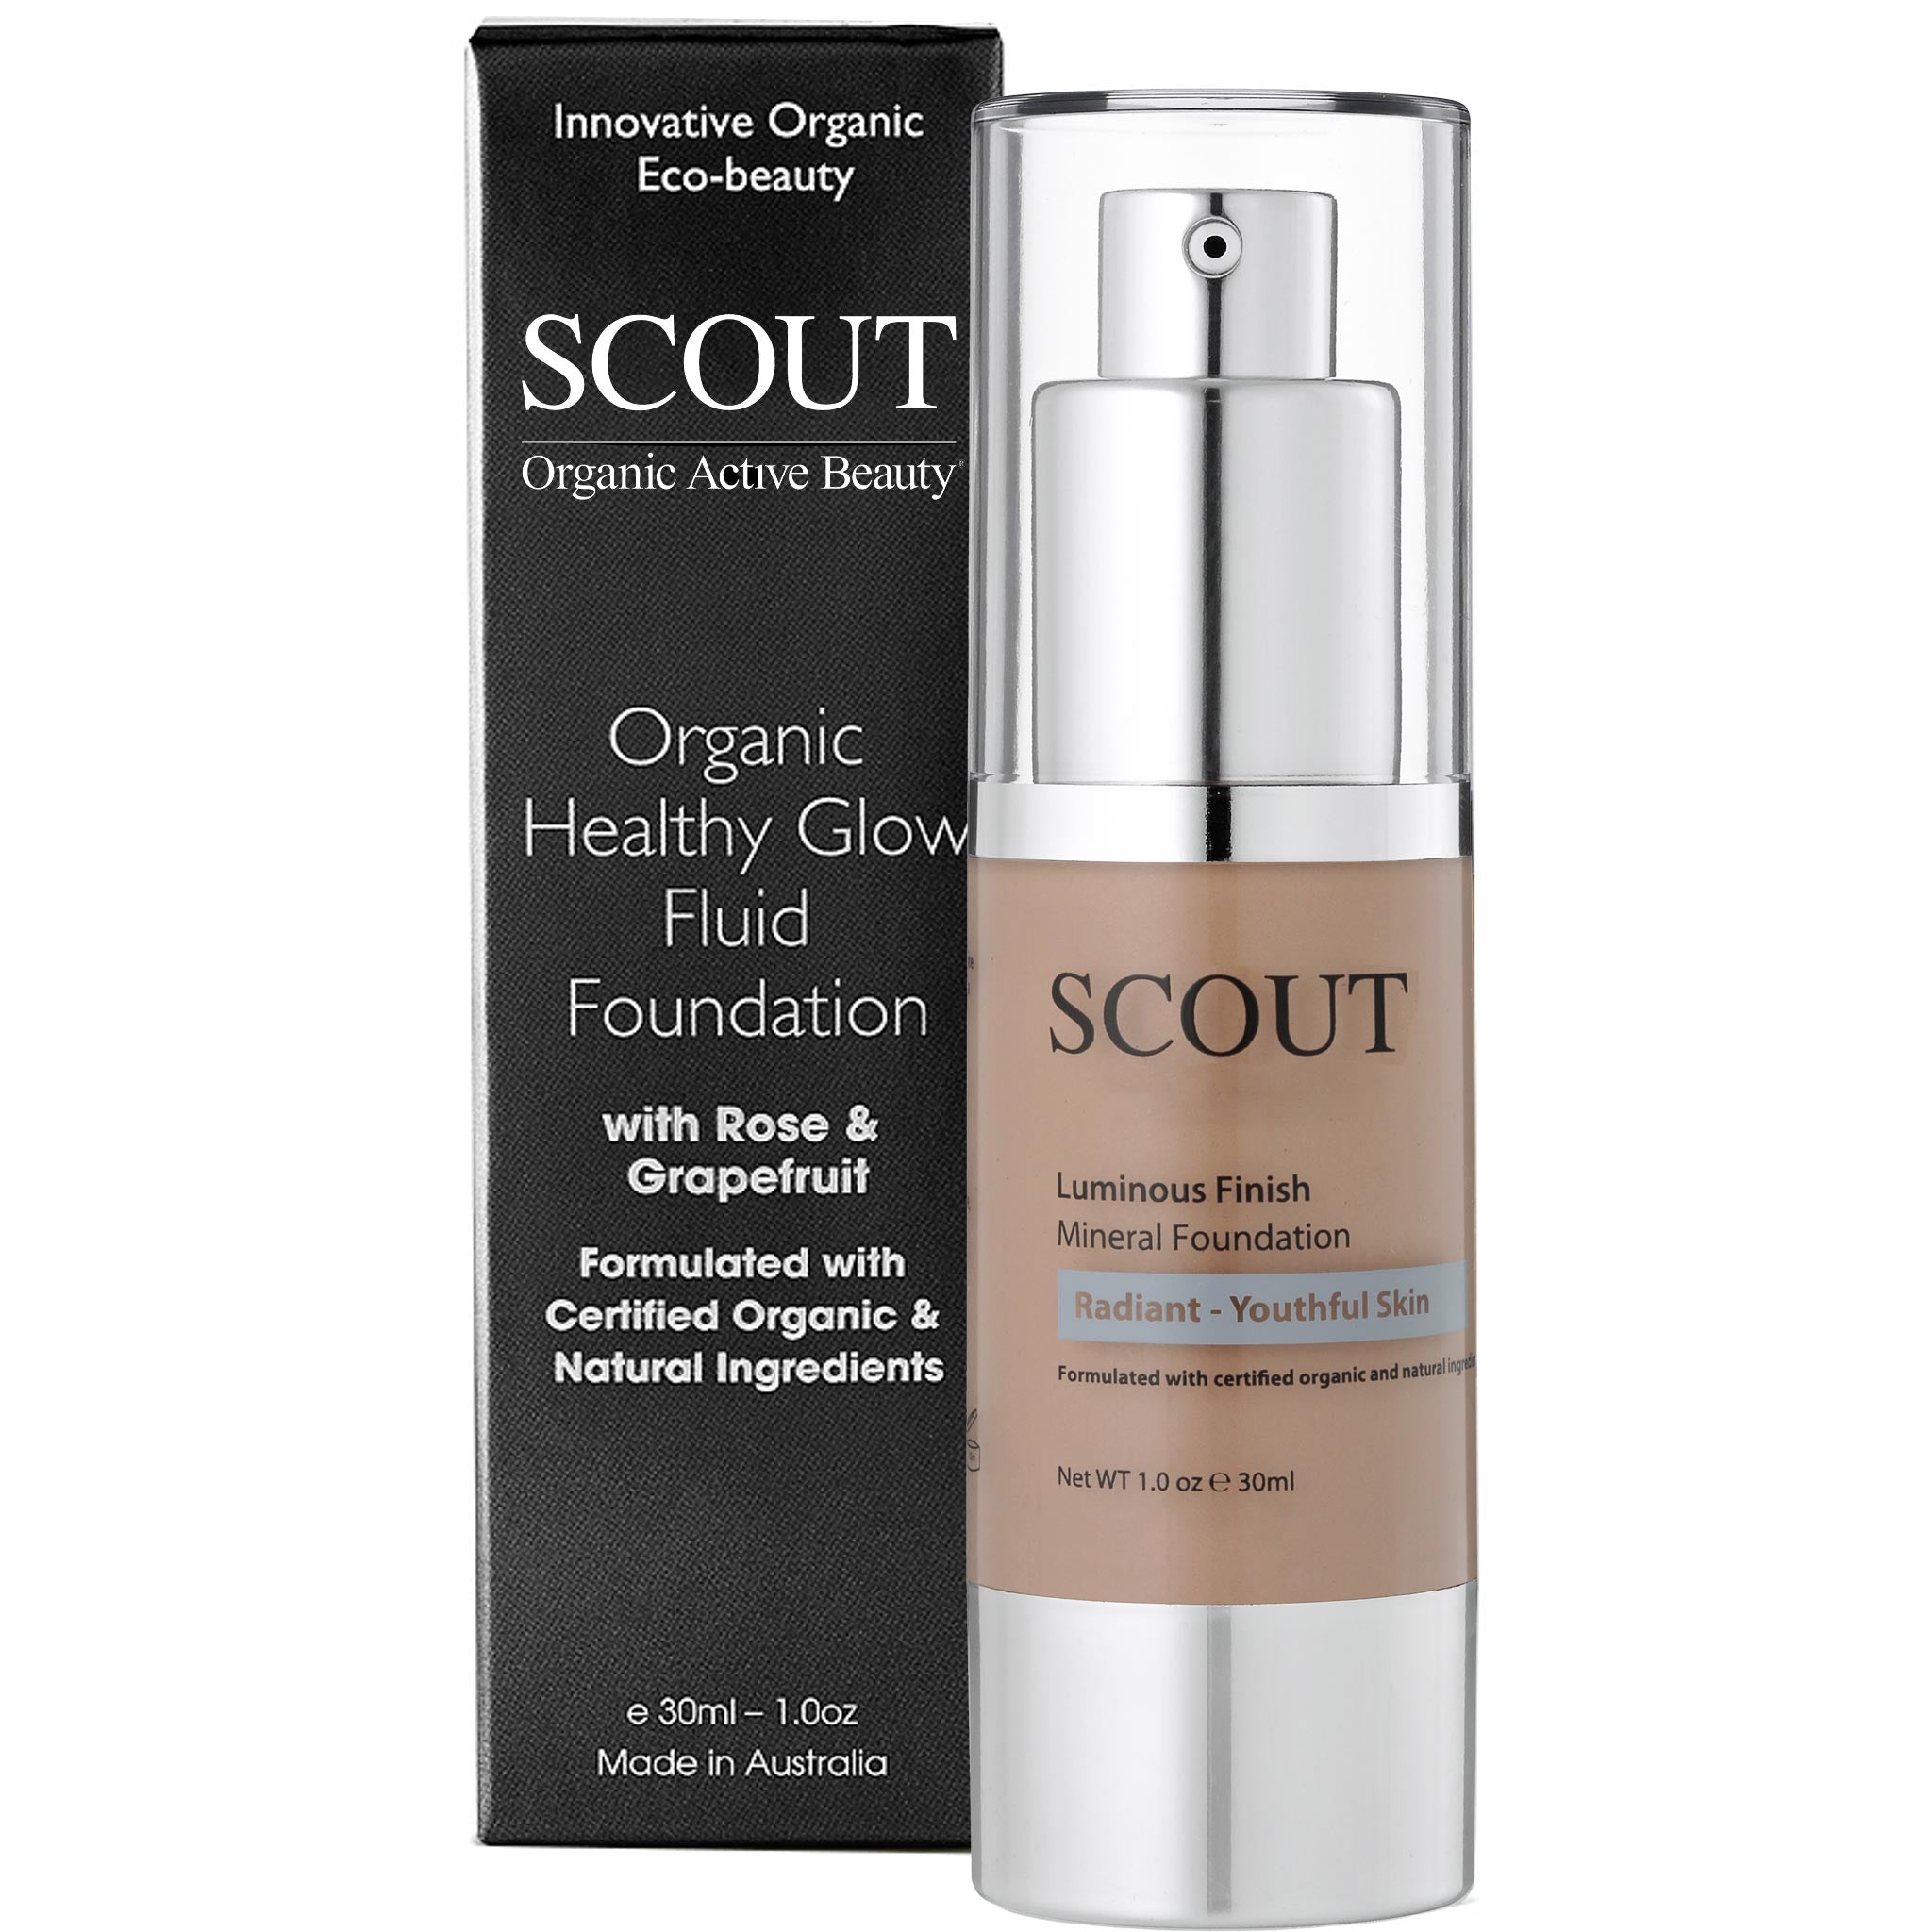 Organic Healthy Glow Fluid Foundation with Rose & Grapefruit